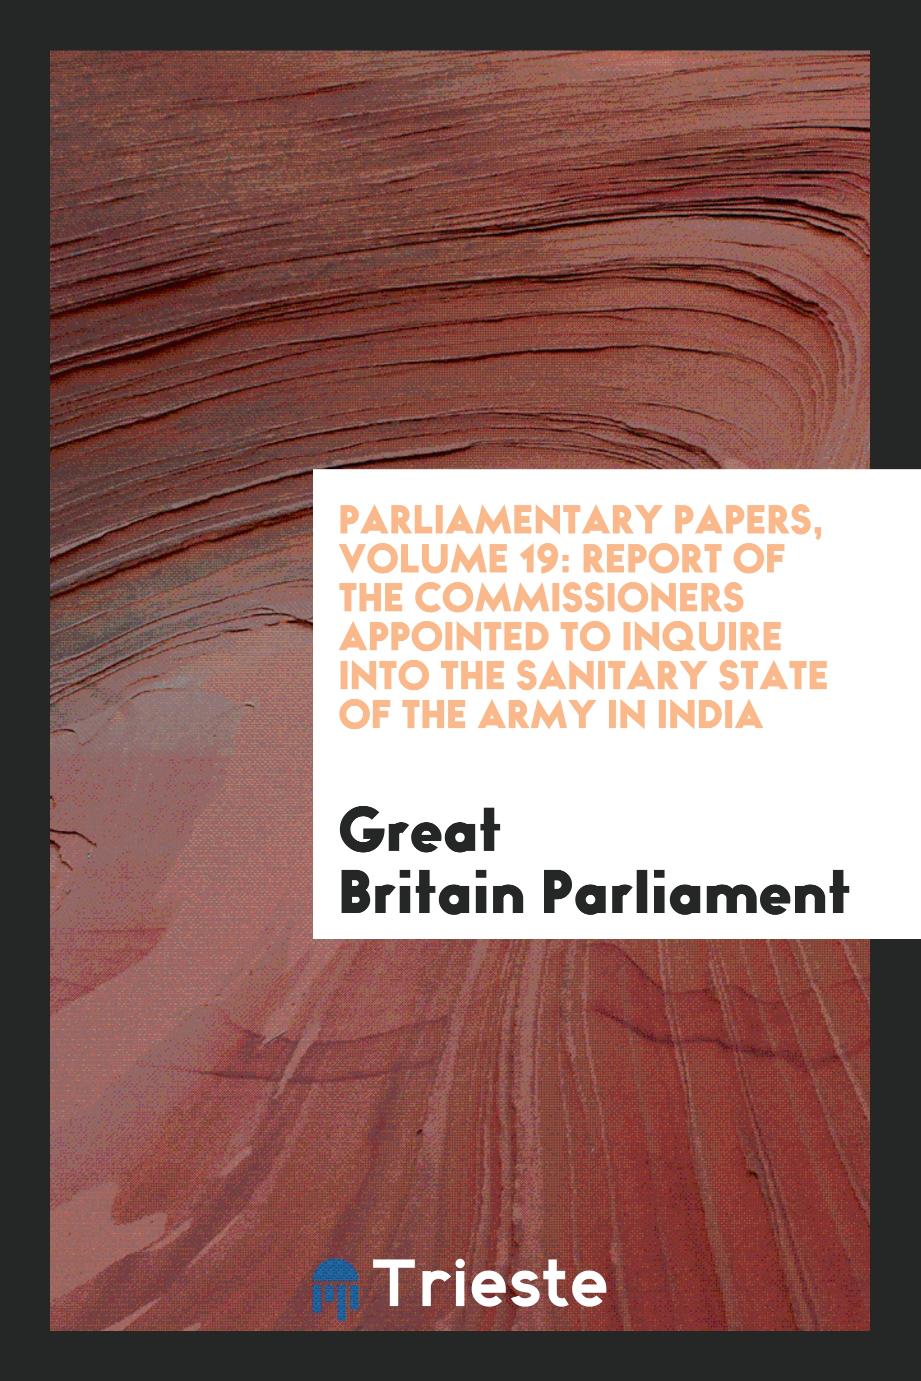 Parliamentary Papers, Volume 19: Report of the Commissioners Appointed to Inquire into the Sanitary State of the Army in India